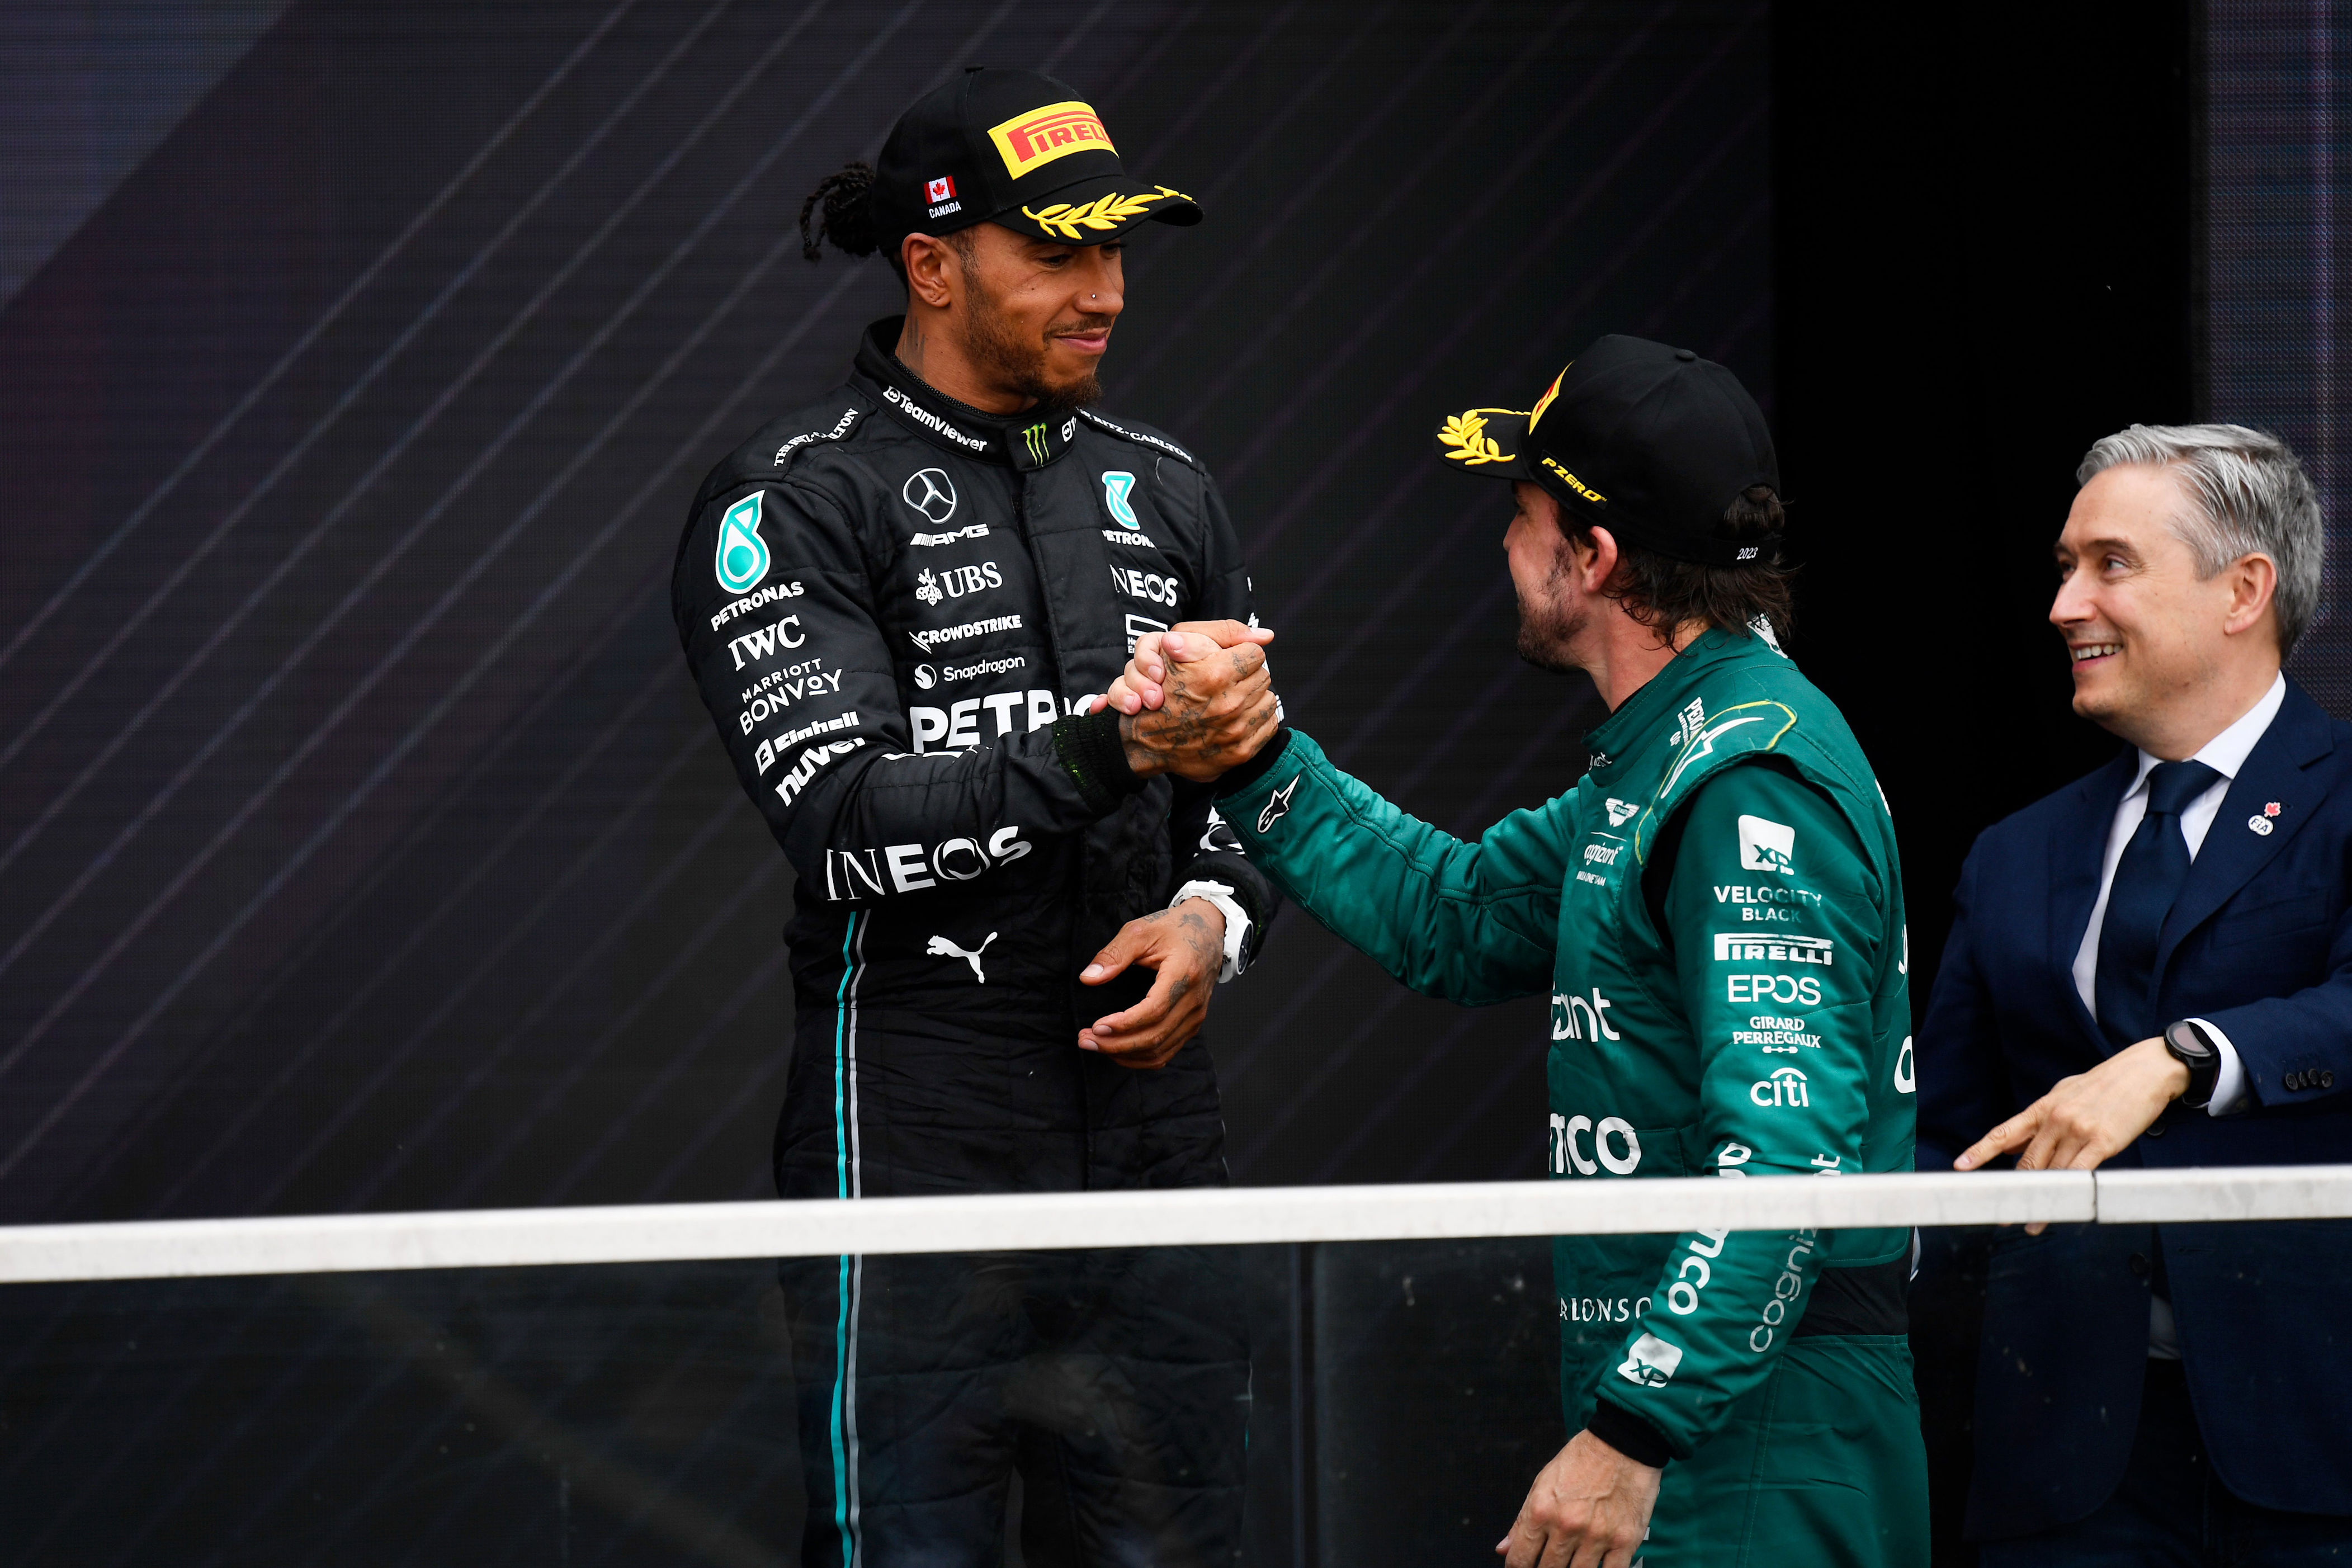 fernando alonso’s new deal says far more about mercedes than it does aston martin